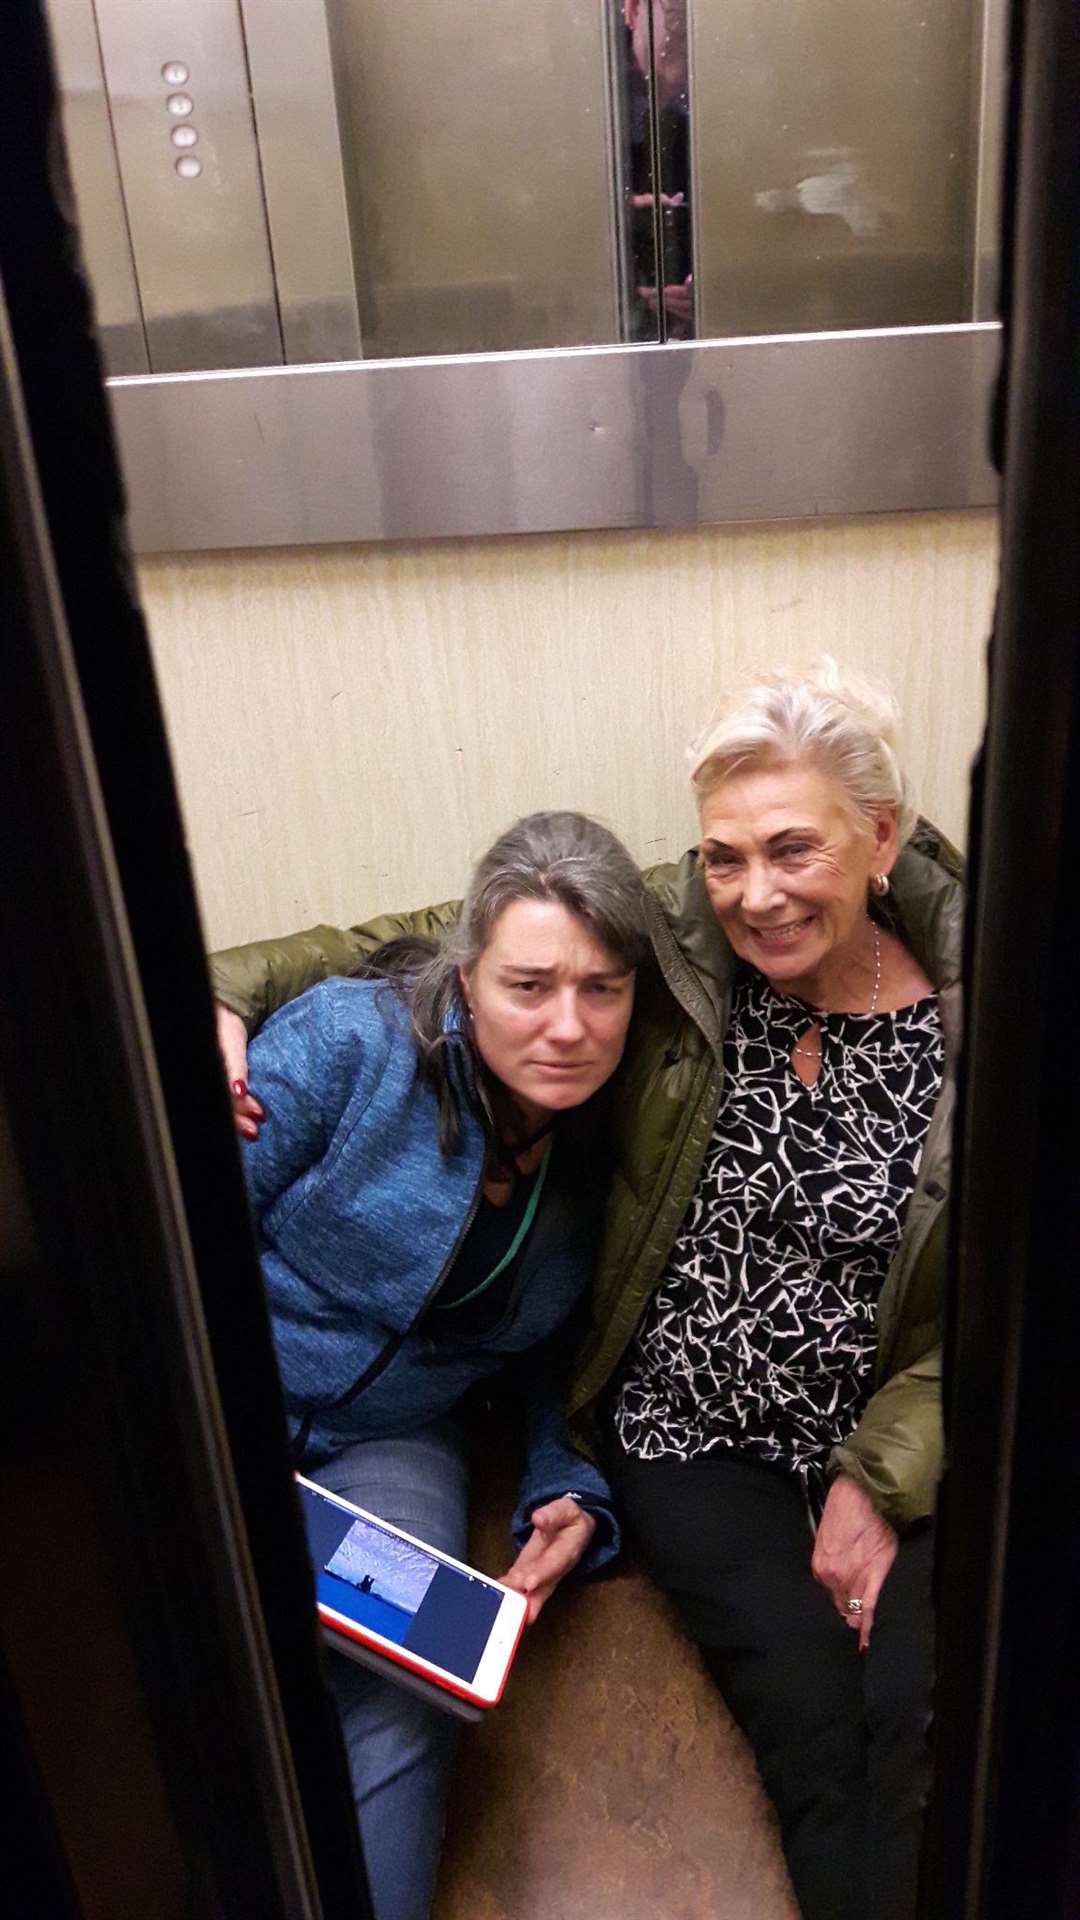 Cllrs Monique Bonney, left, and June Garrad had to be rescued by firemen after becoming trapped in a lift at Swale House after a full council meeting